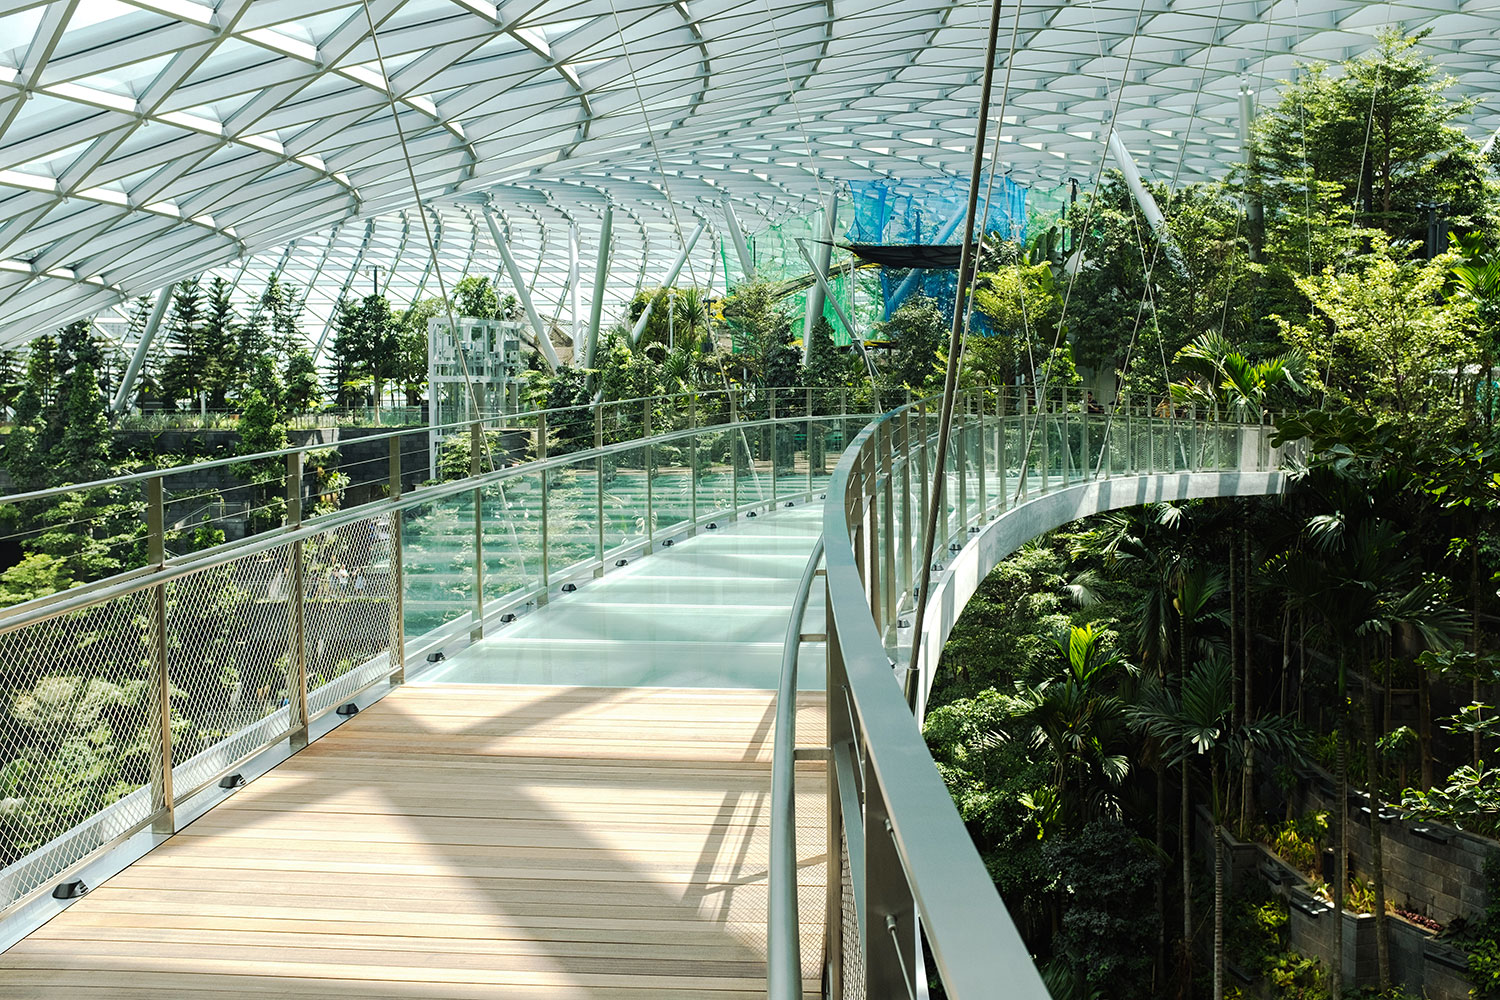 Jewel Changi Airport's Canopy Park is spread over 14,000 square metres and is home to more than 1400 trees and palms.